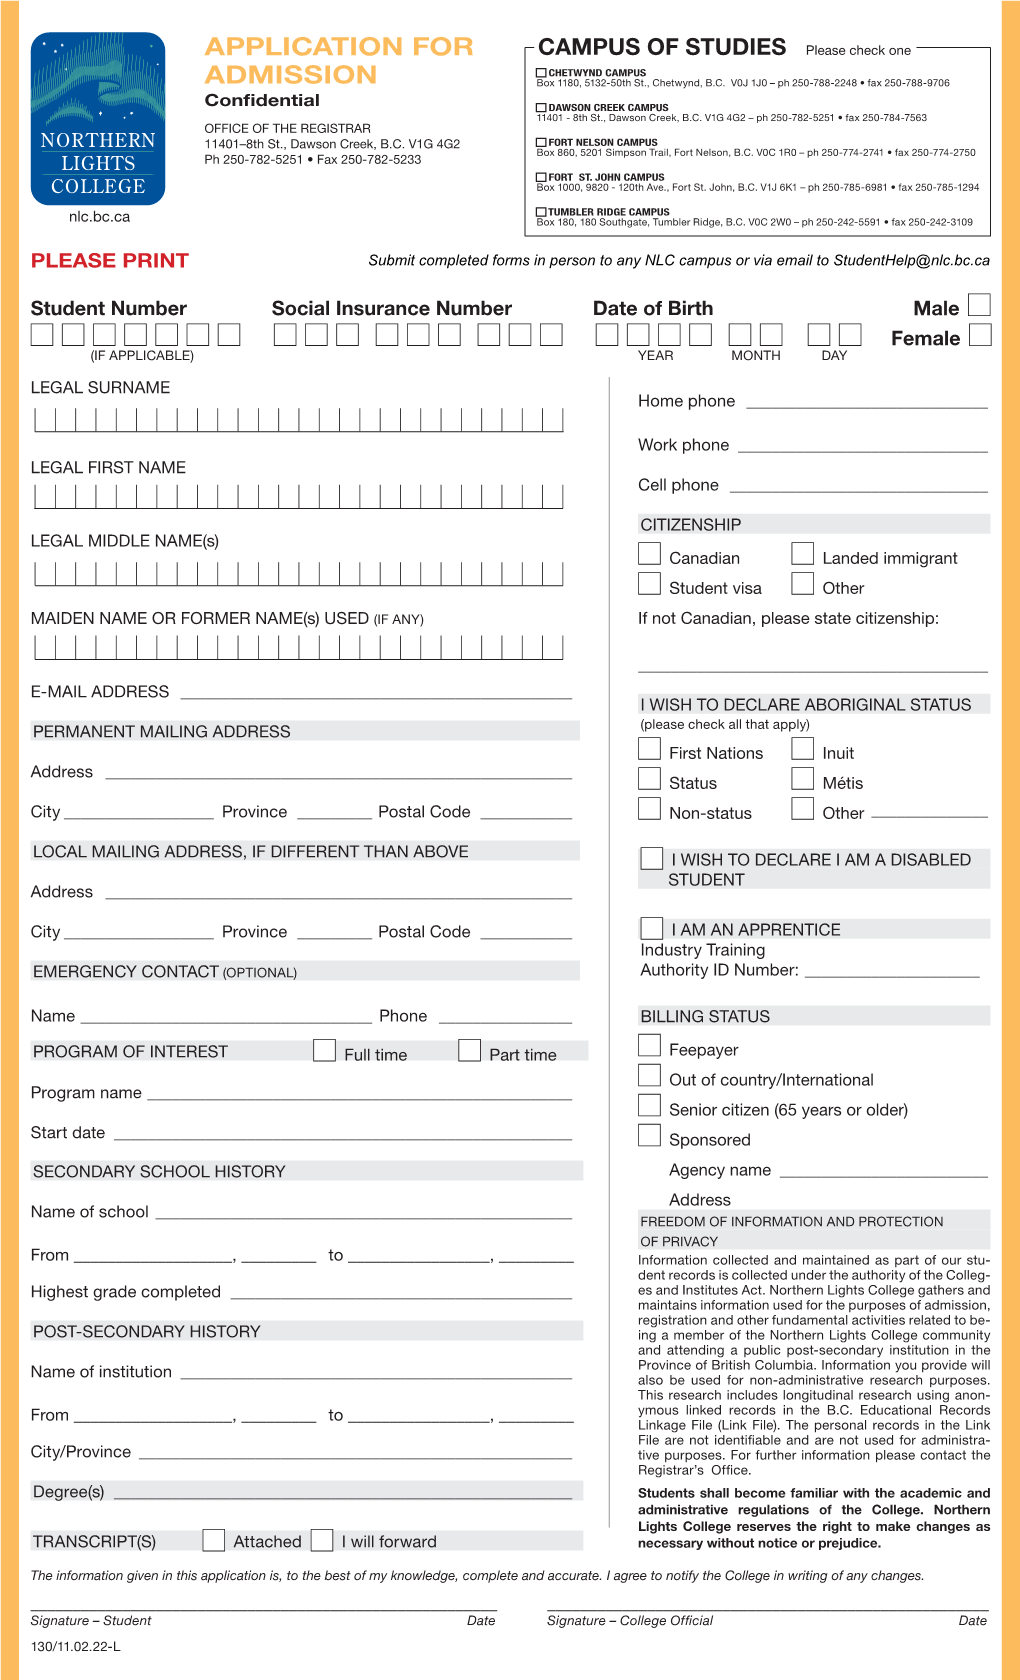 NLC Application for Admissions